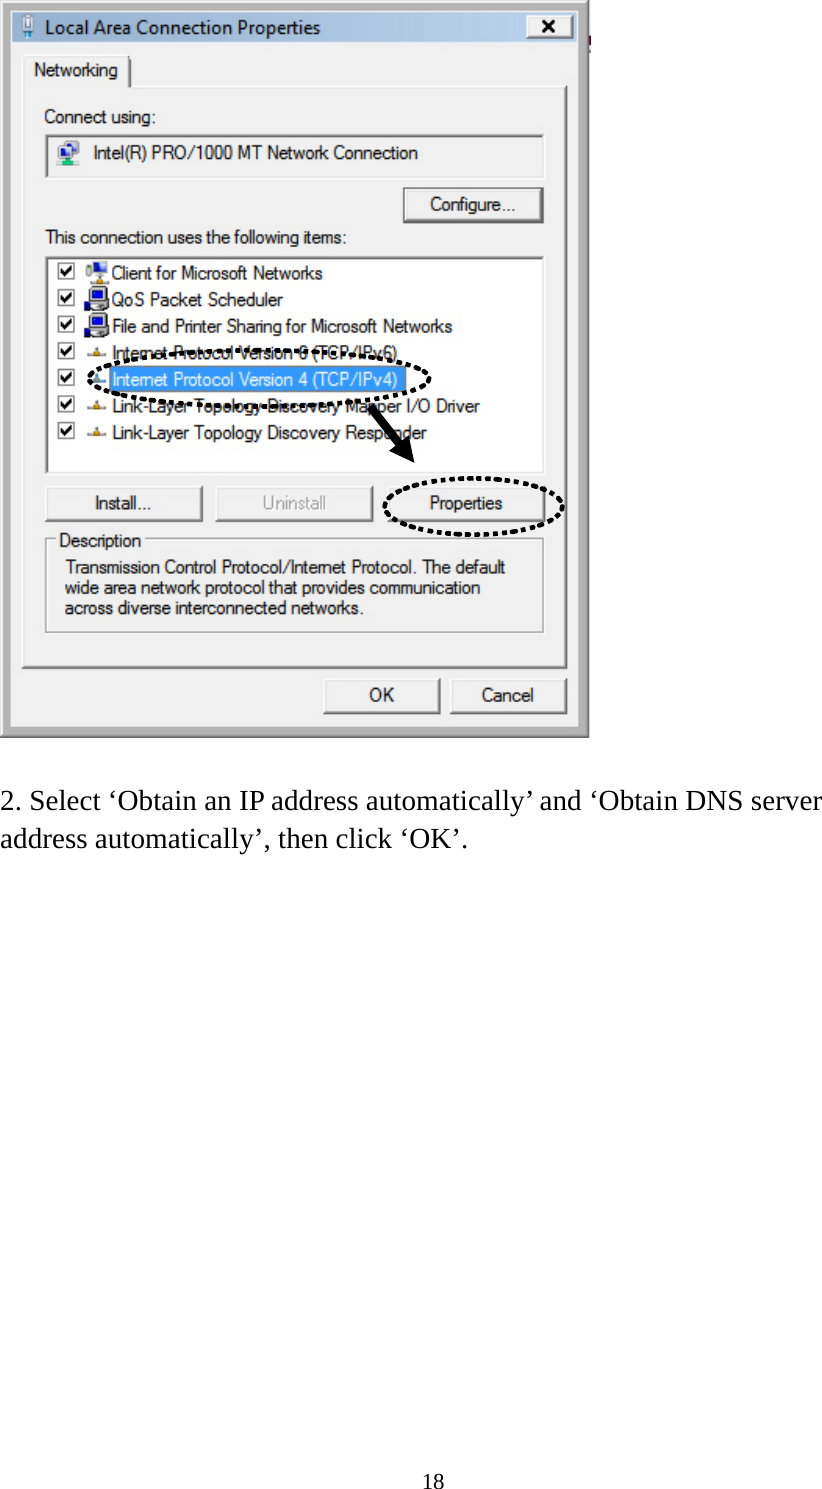 18   2. Select ‘Obtain an IP address automatically’ and ‘Obtain DNS server address automatically’, then click ‘OK’.  